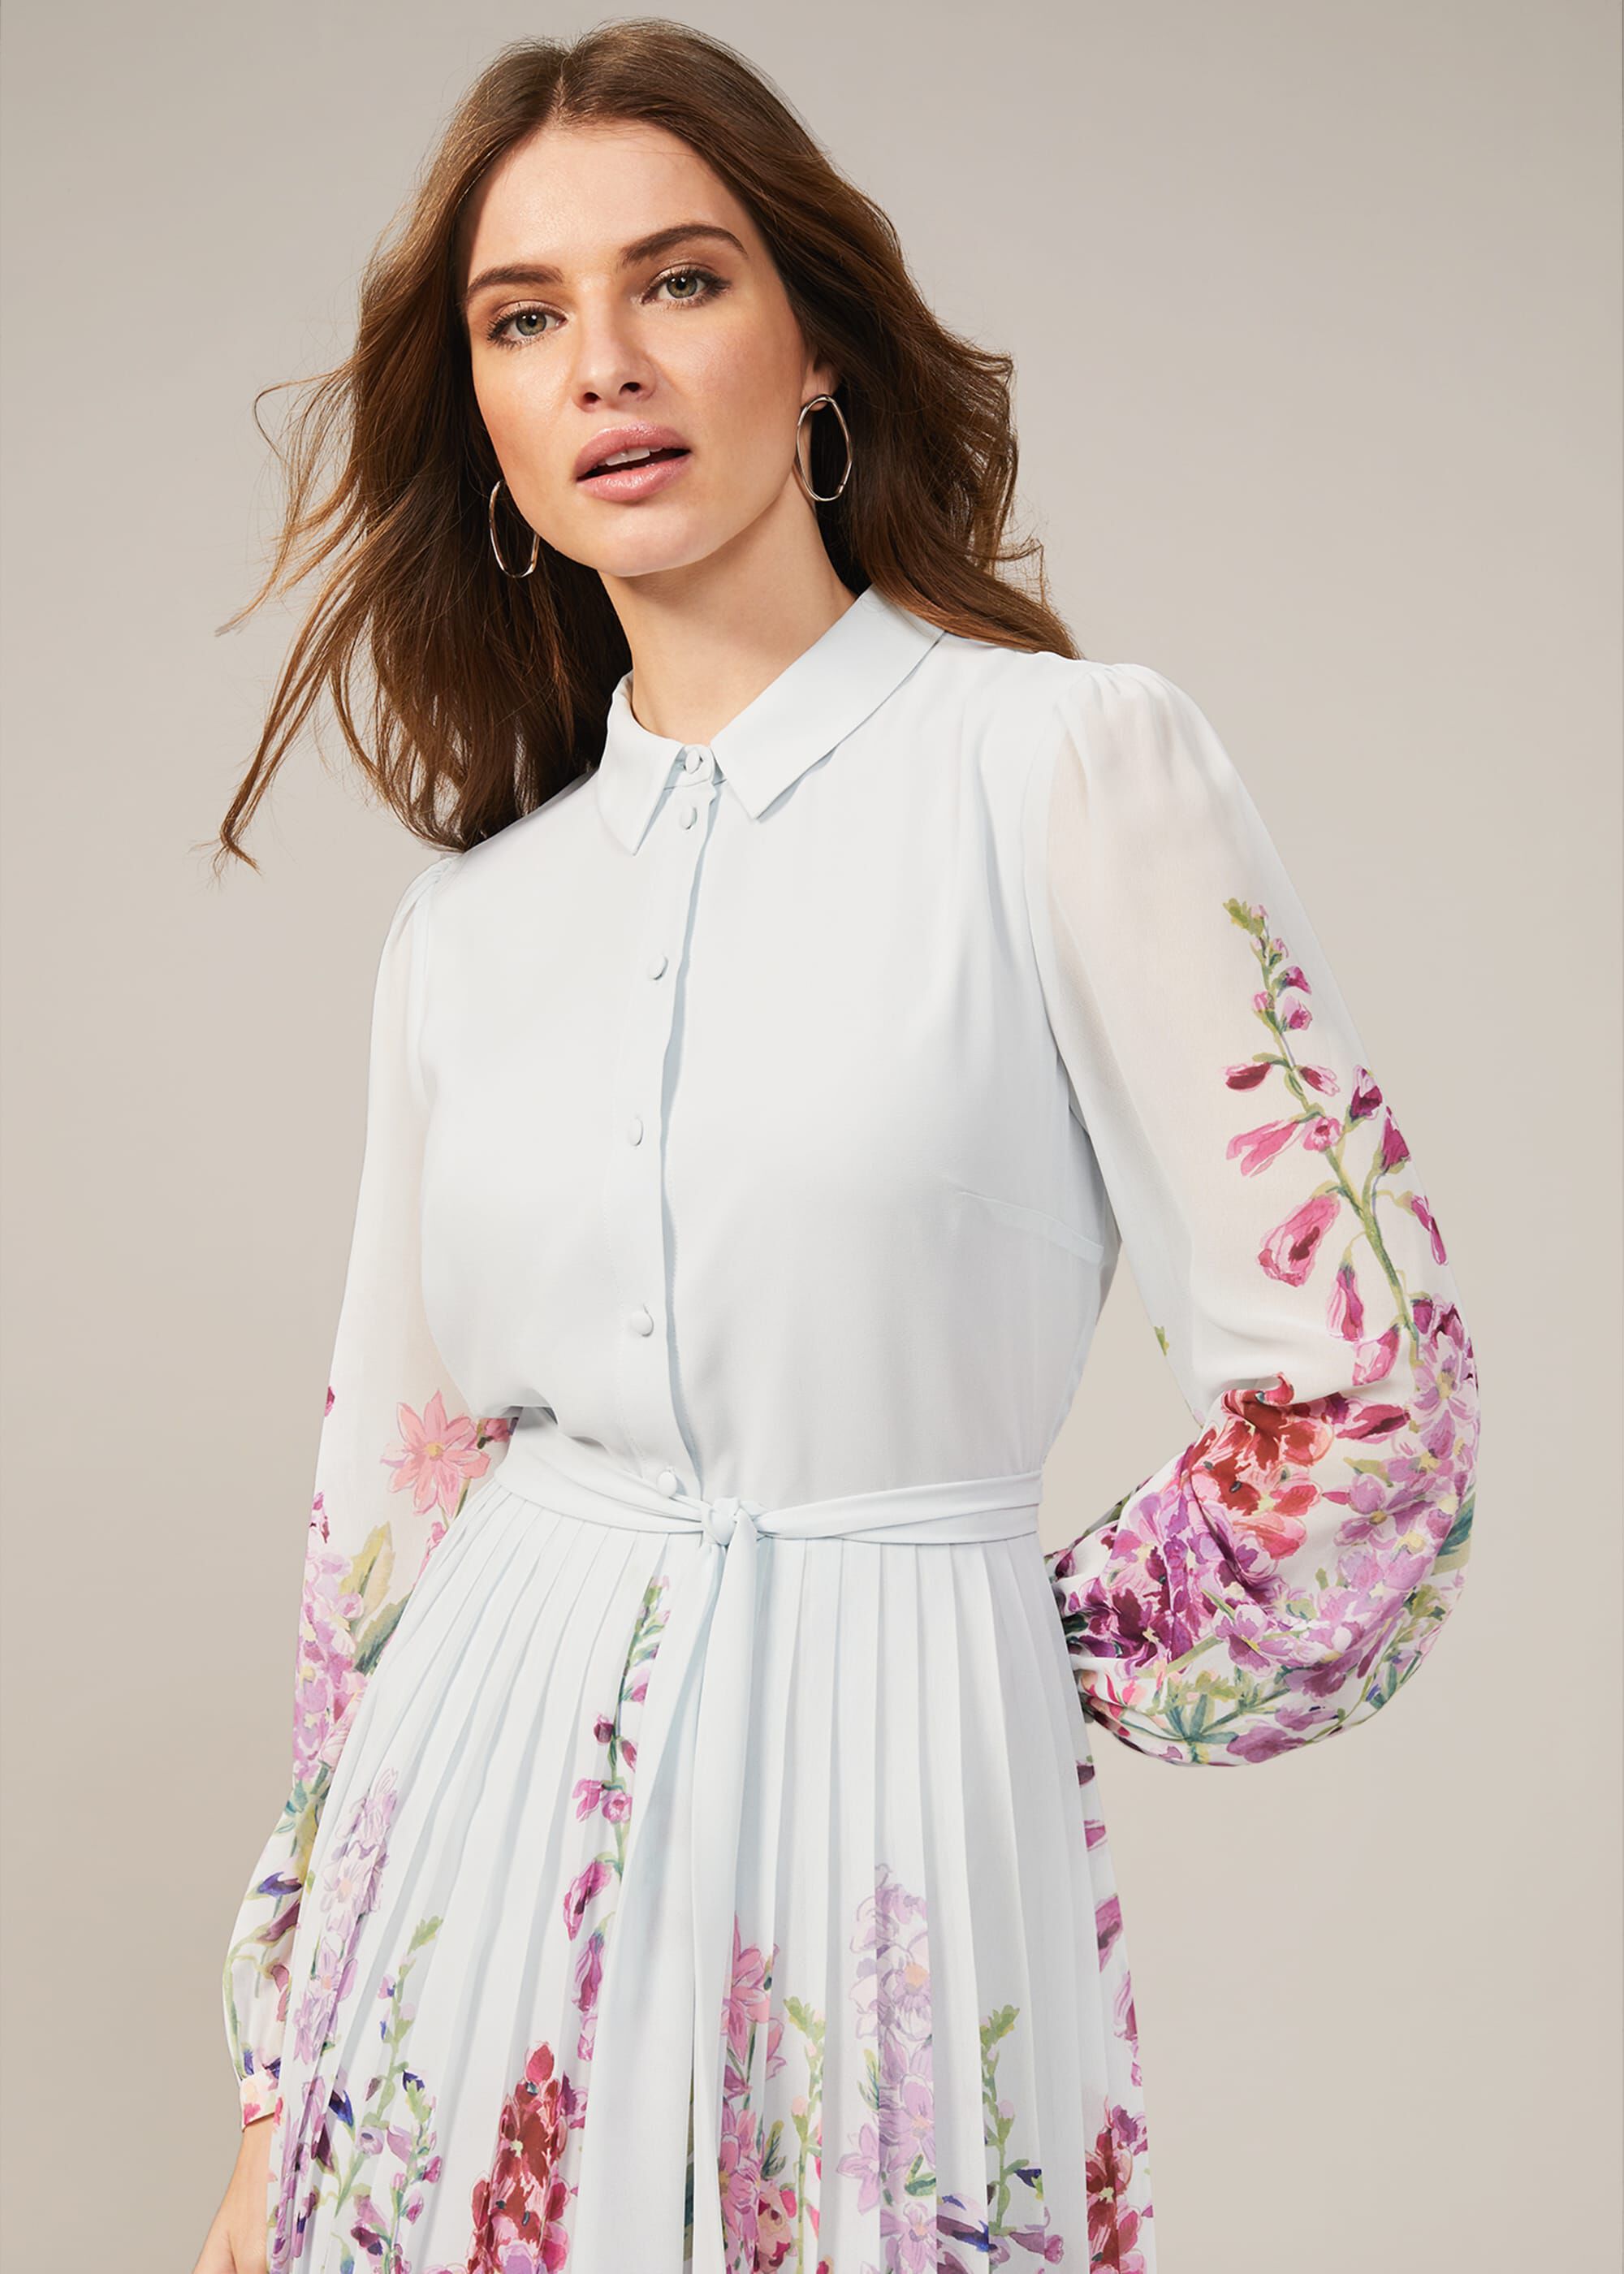 Rachie Floral Pleated Dress | Phase Eight